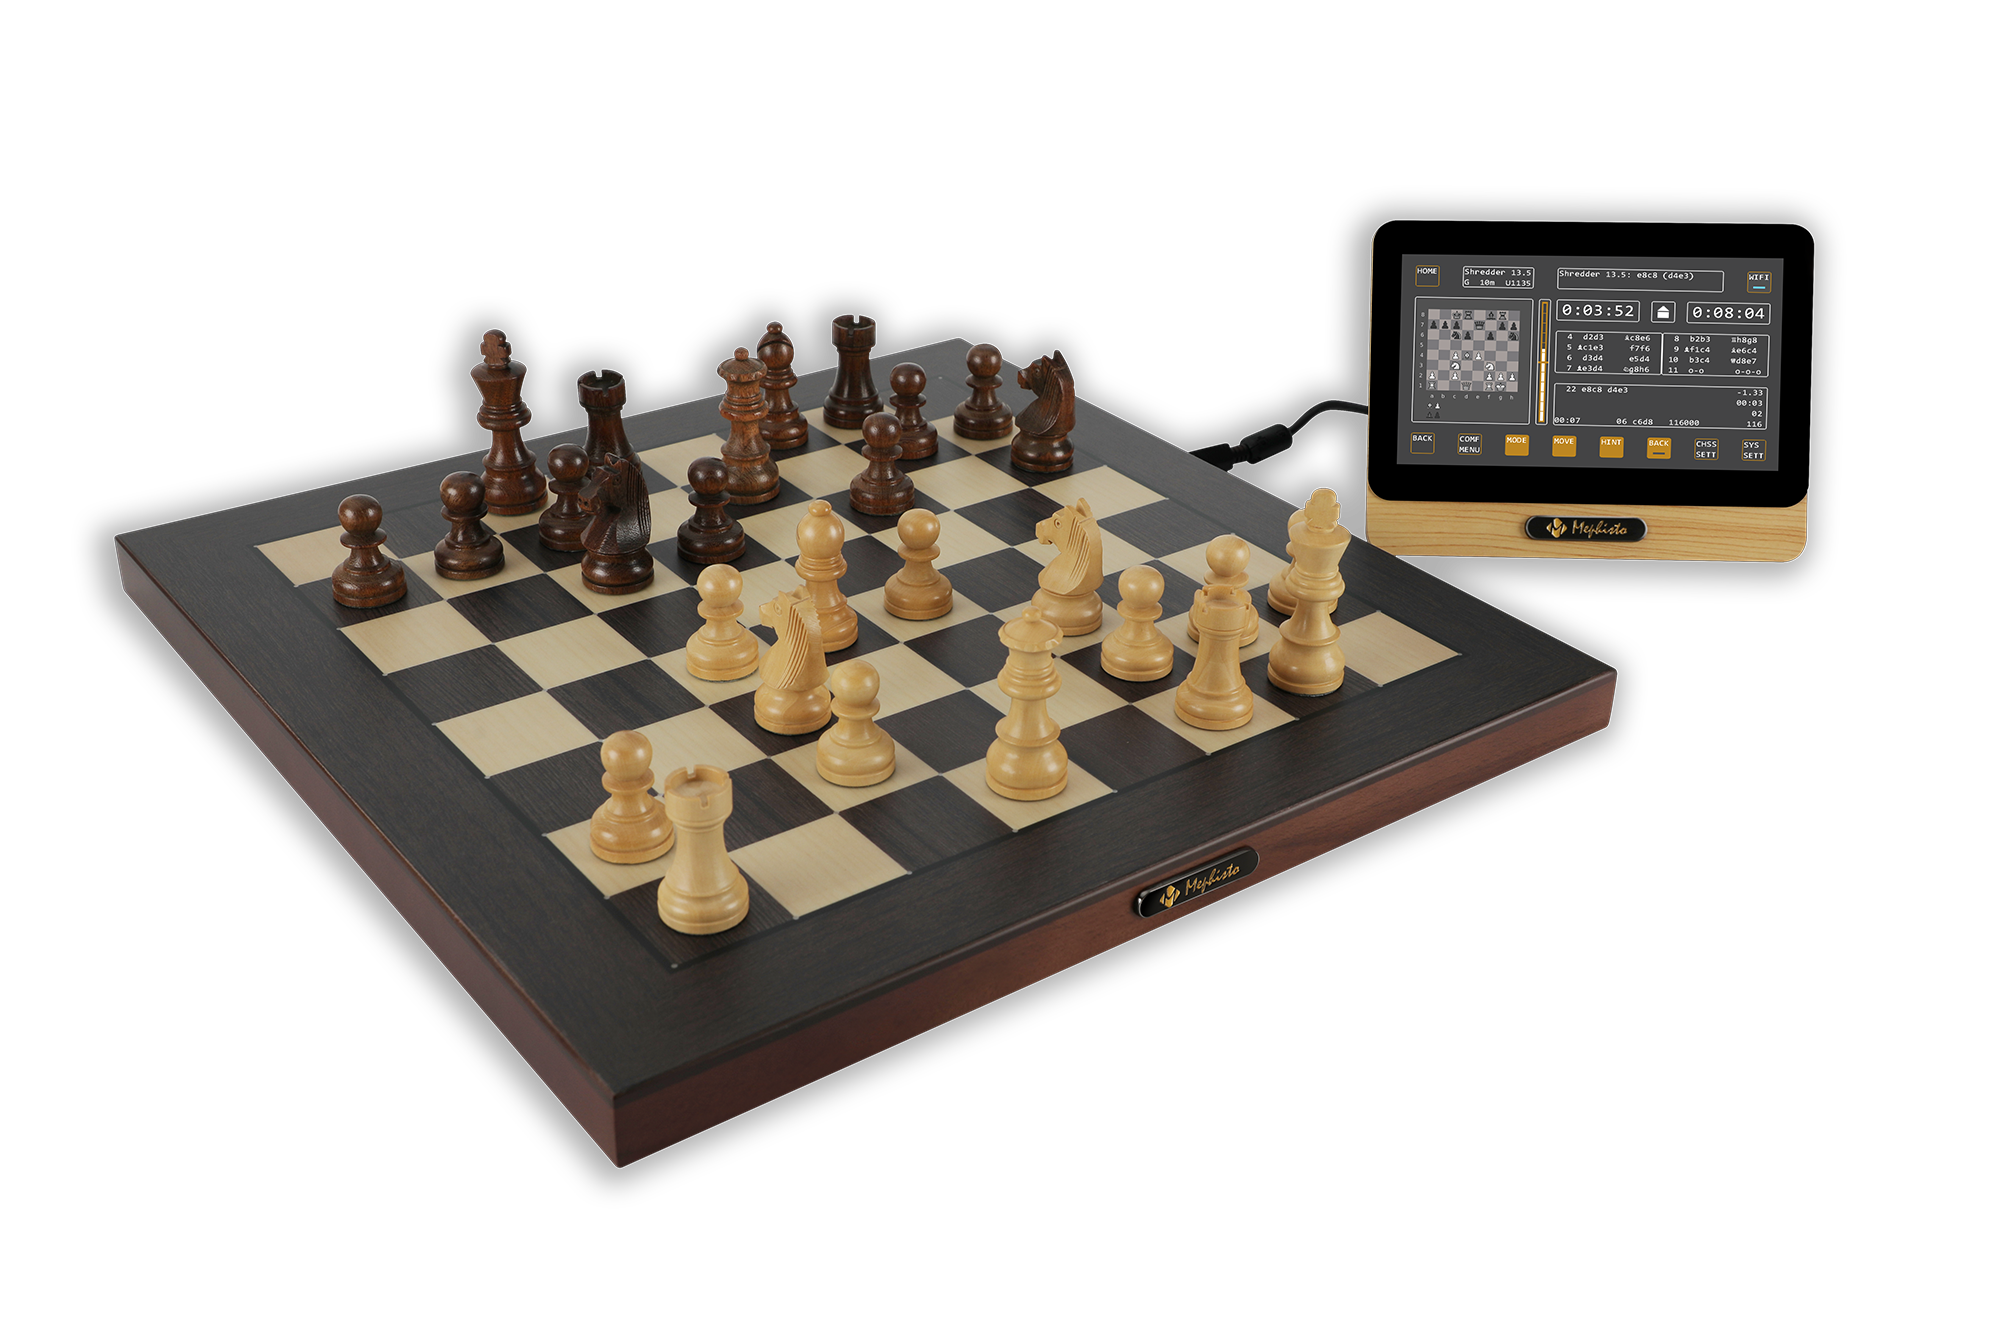 Shredder Classic 5 - Chess Playing Software Download